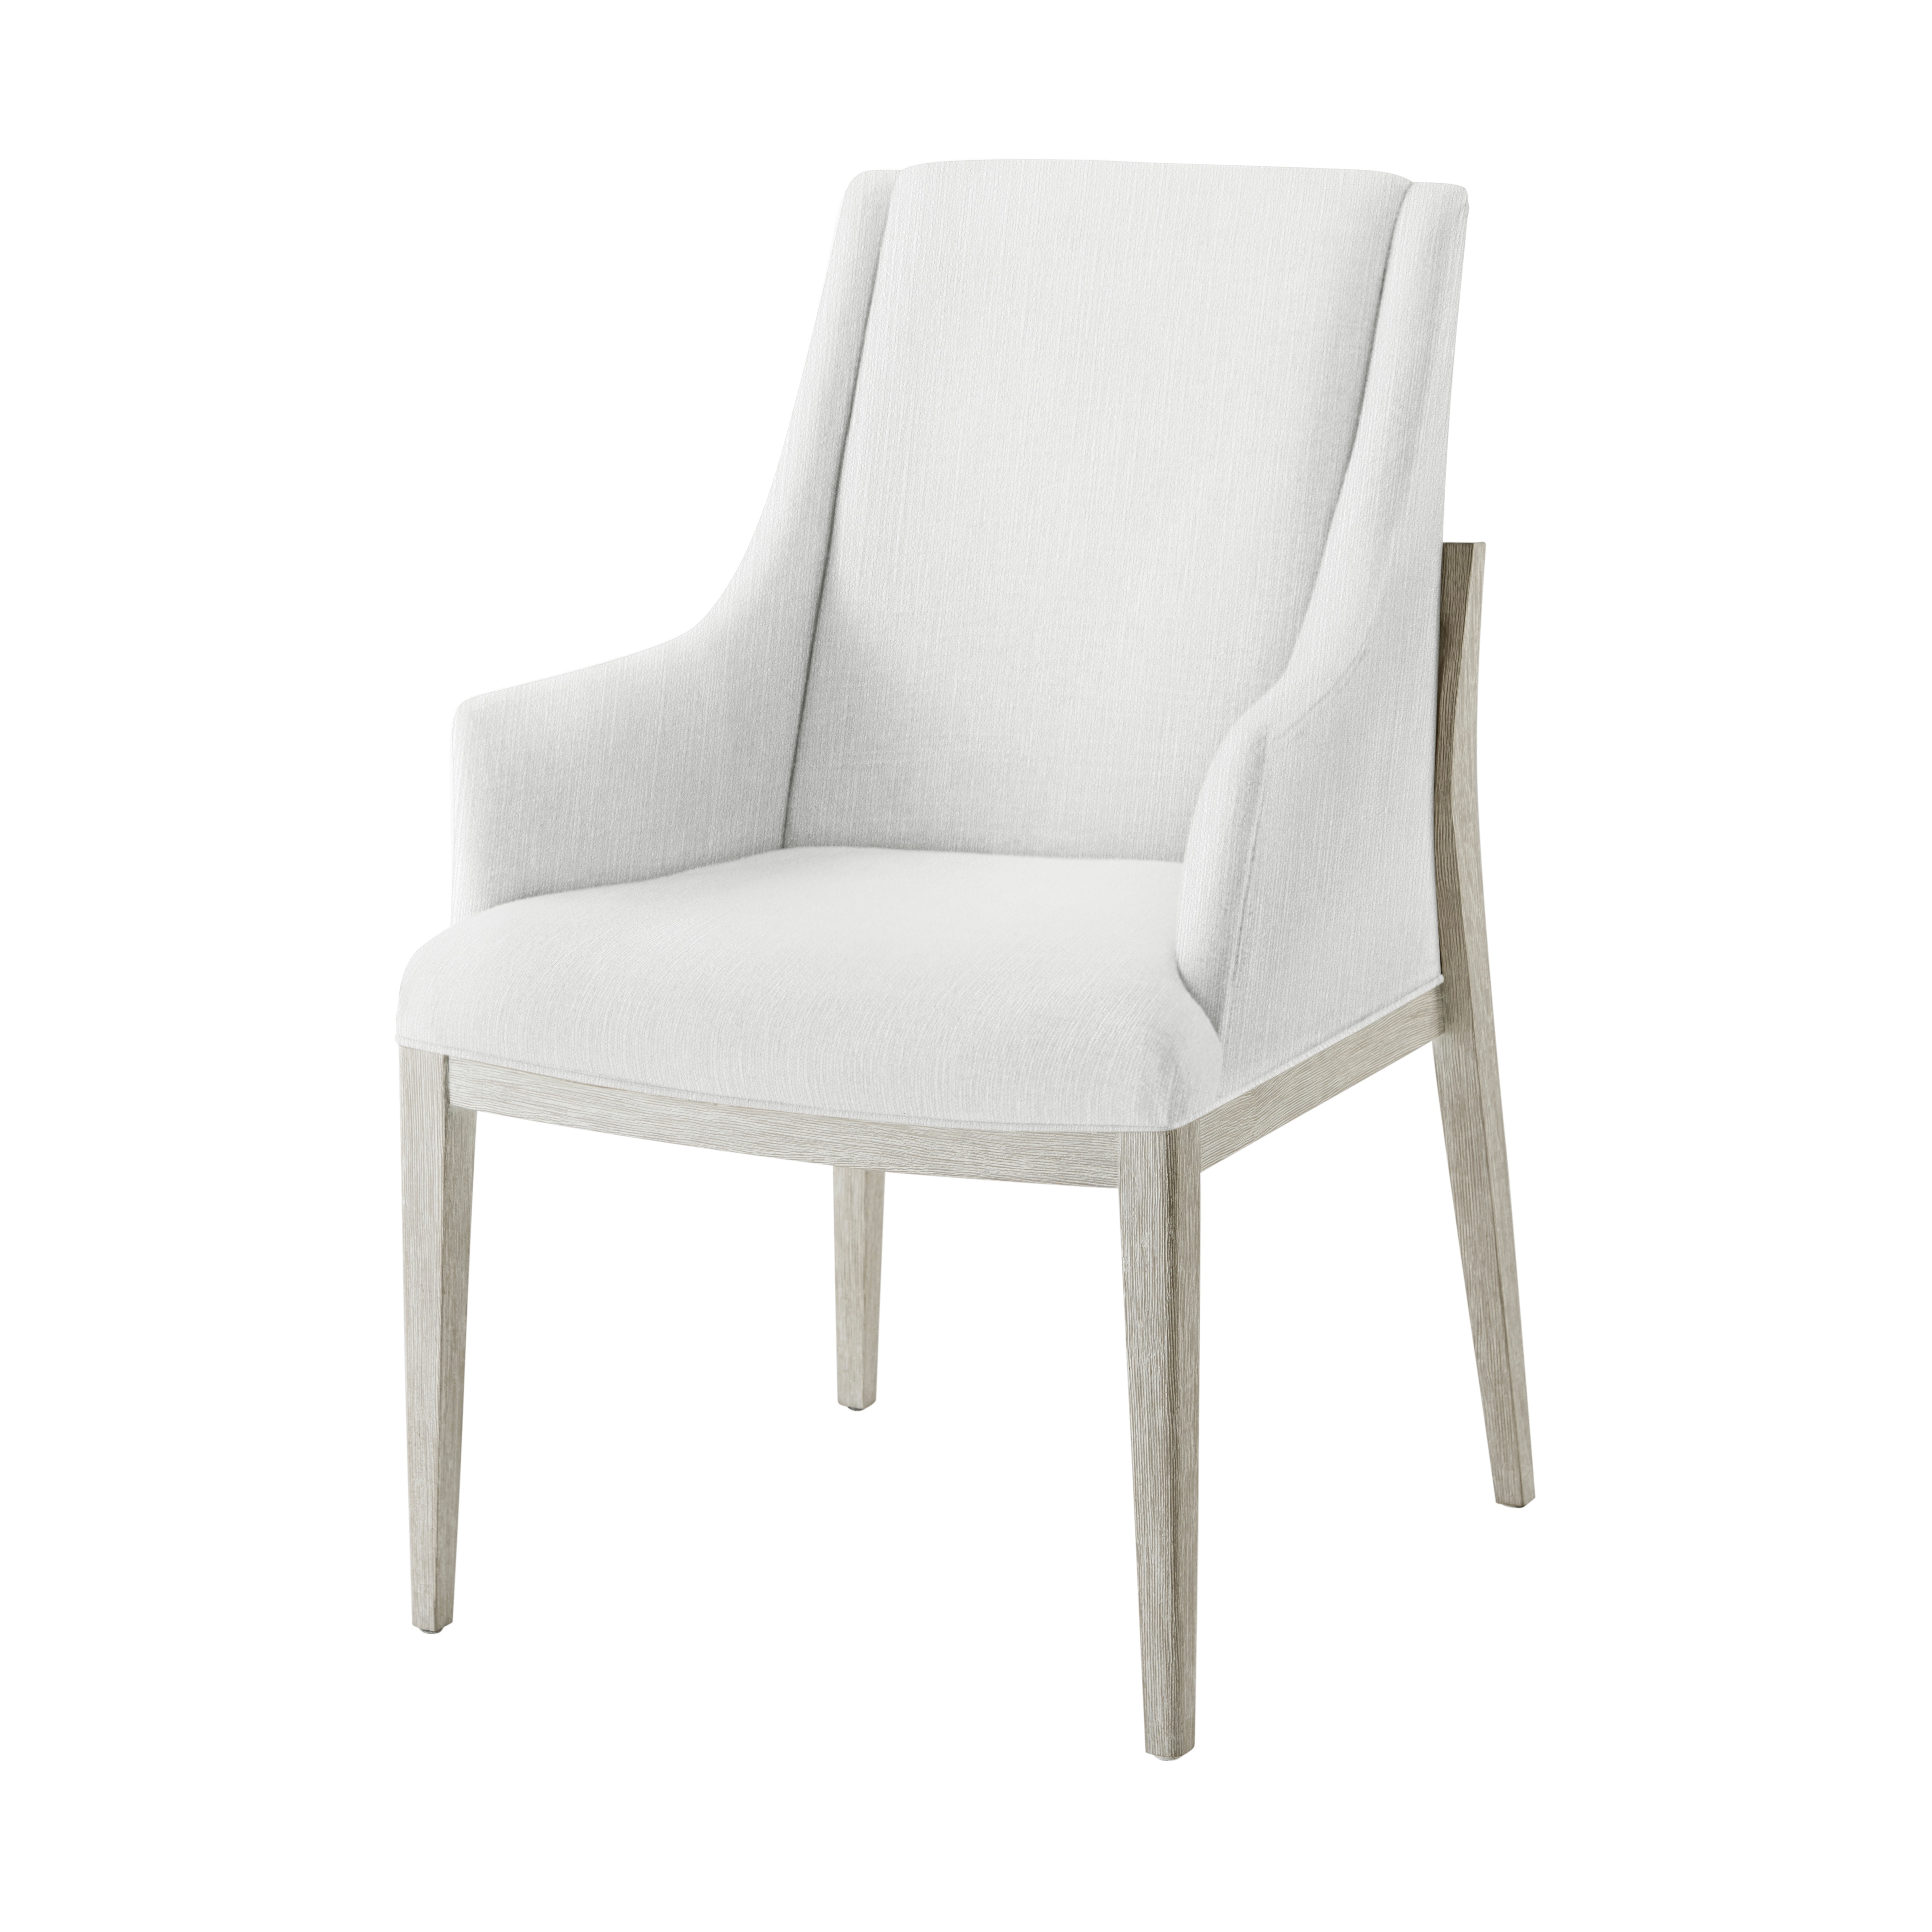 Theodore Alexander Casual Dining Breeze Upholstered Arm Chair THTA410141CFY  Walter E. Smithe Furniture & Design